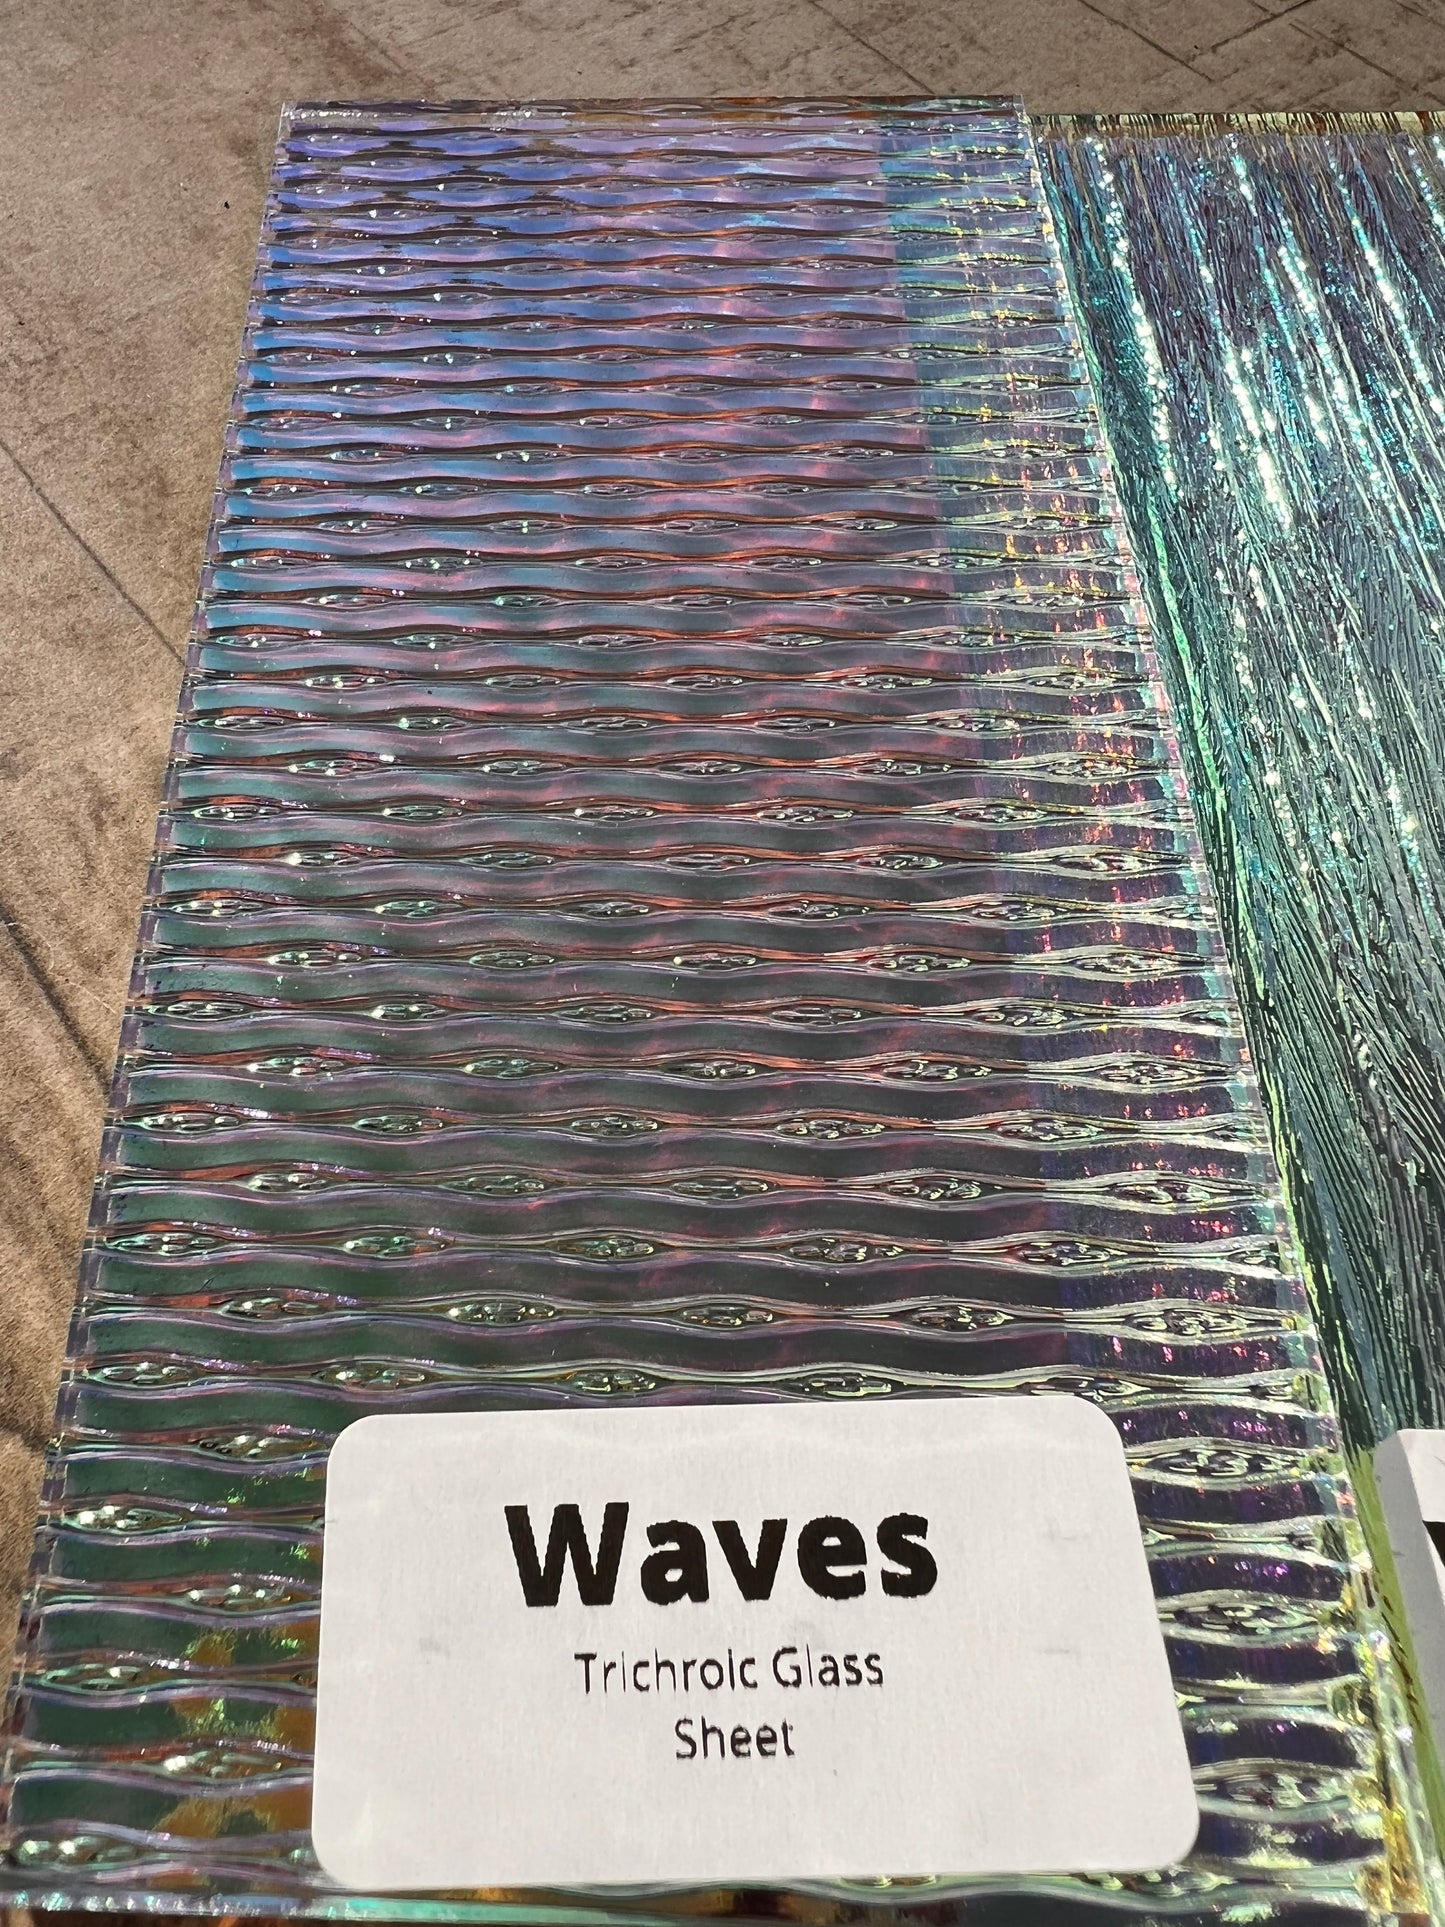 Trichroic Glass Sheets - Waves